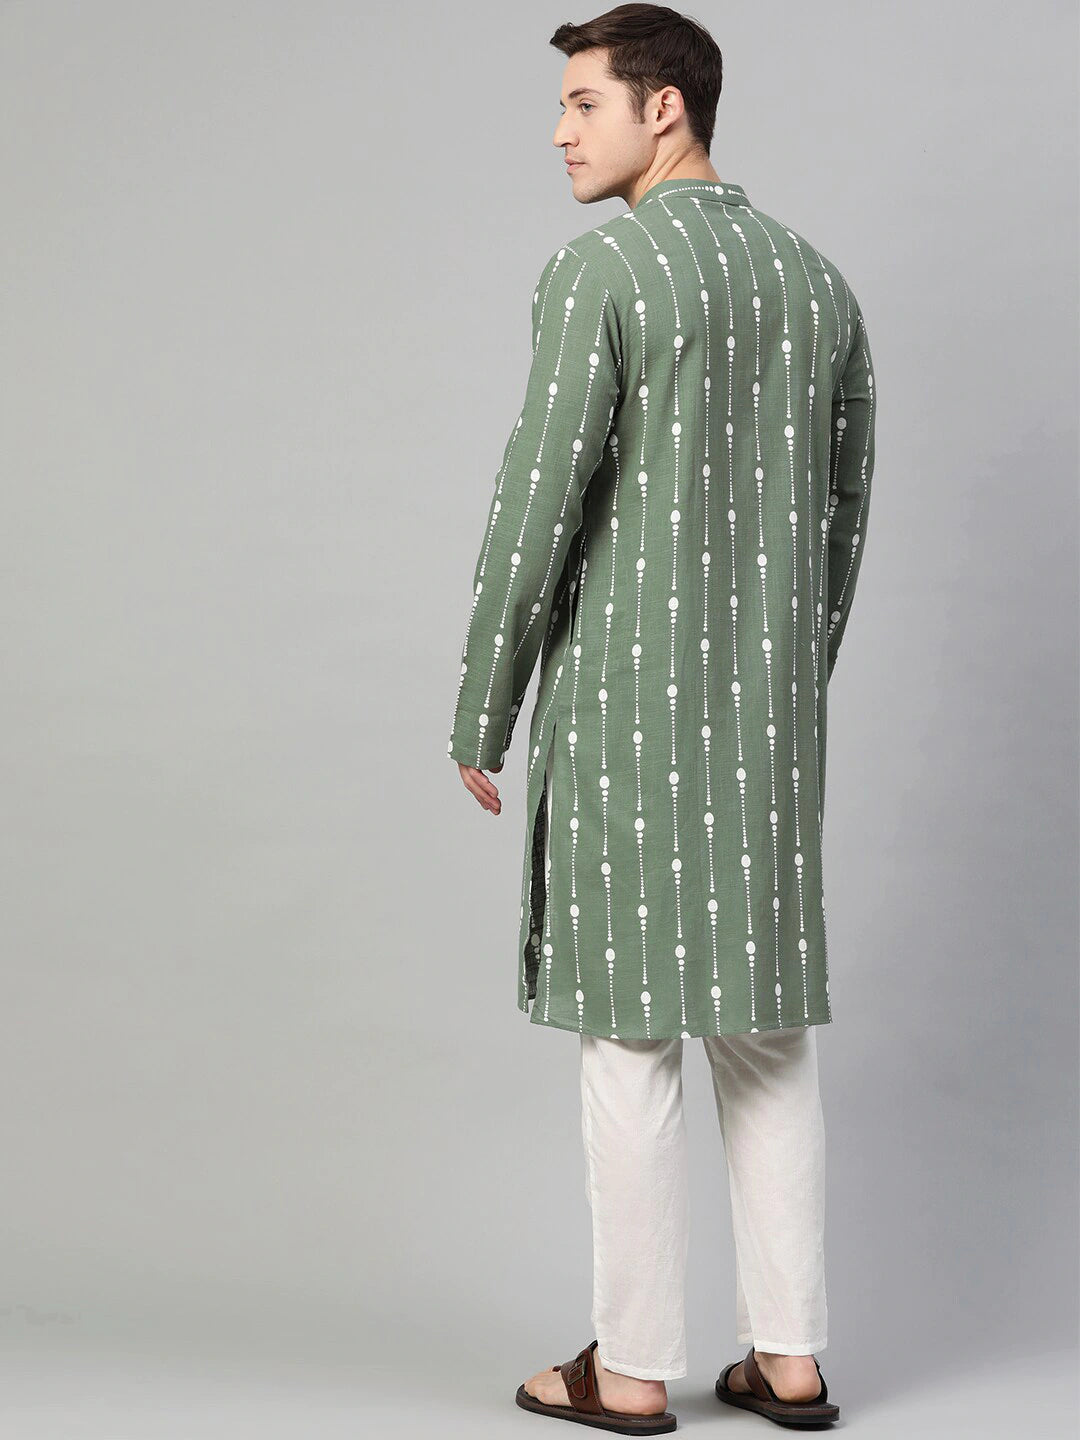 Green Print Kurta Set Indian Clothing in Denver, CO, Aurora, CO, Boulder, CO, Fort Collins, CO, Colorado Springs, CO, Parker, CO, Highlands Ranch, CO, Cherry Creek, CO, Centennial, CO, and Longmont, CO. NATIONWIDE SHIPPING USA- India Fashion X